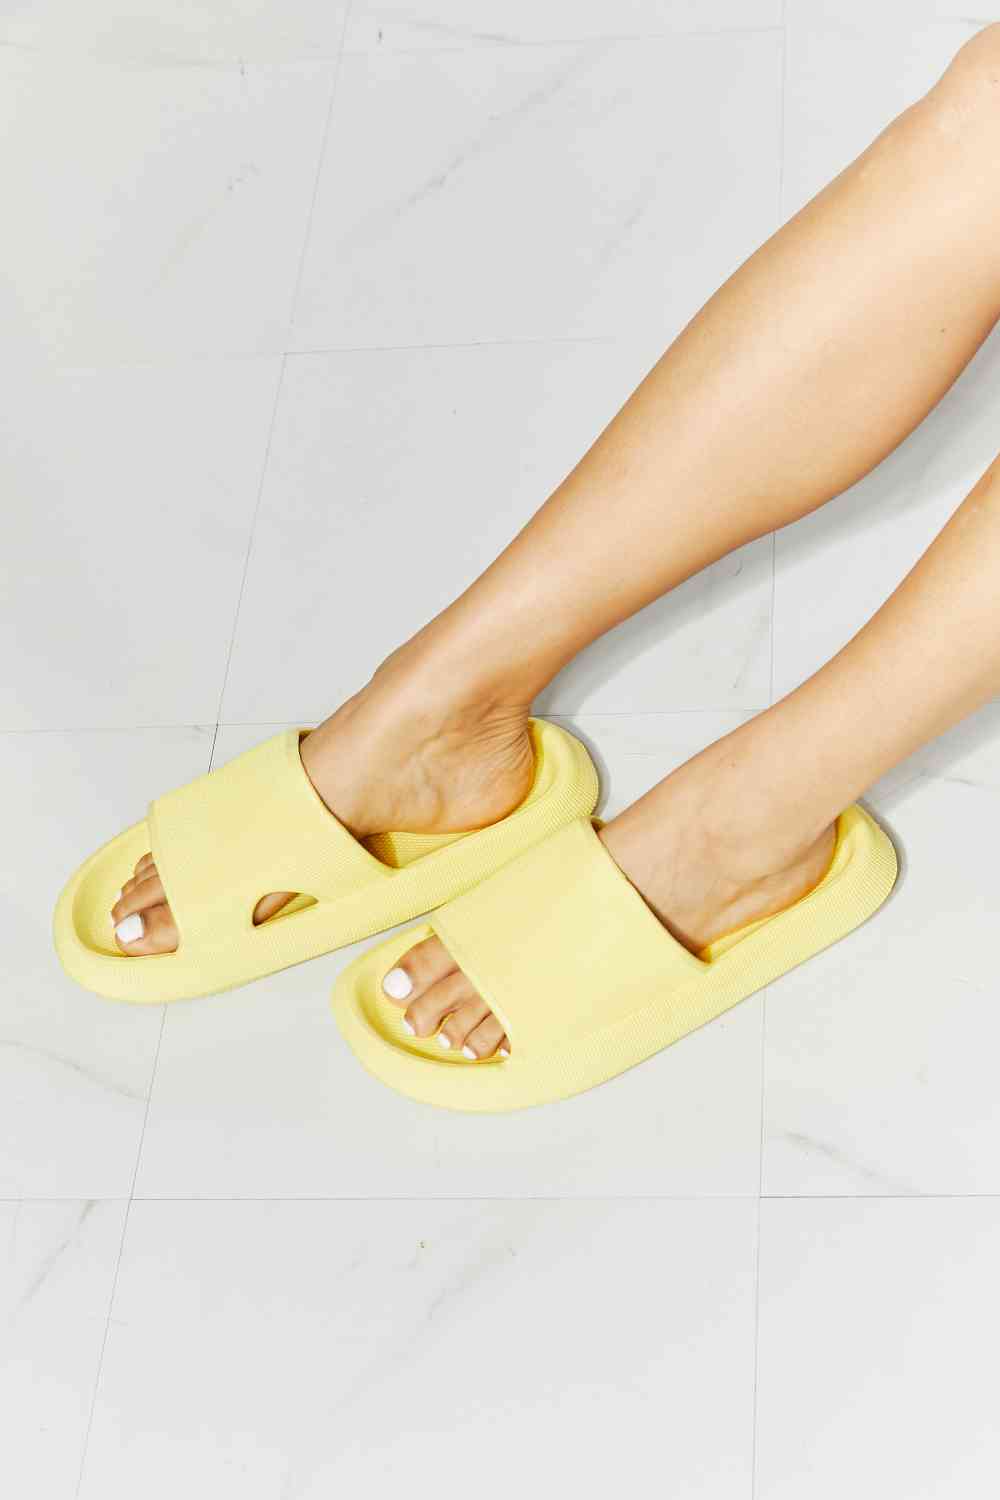 MMShoes Arms Around Me Open Toe Slide in Yellow - Opulence & Essence